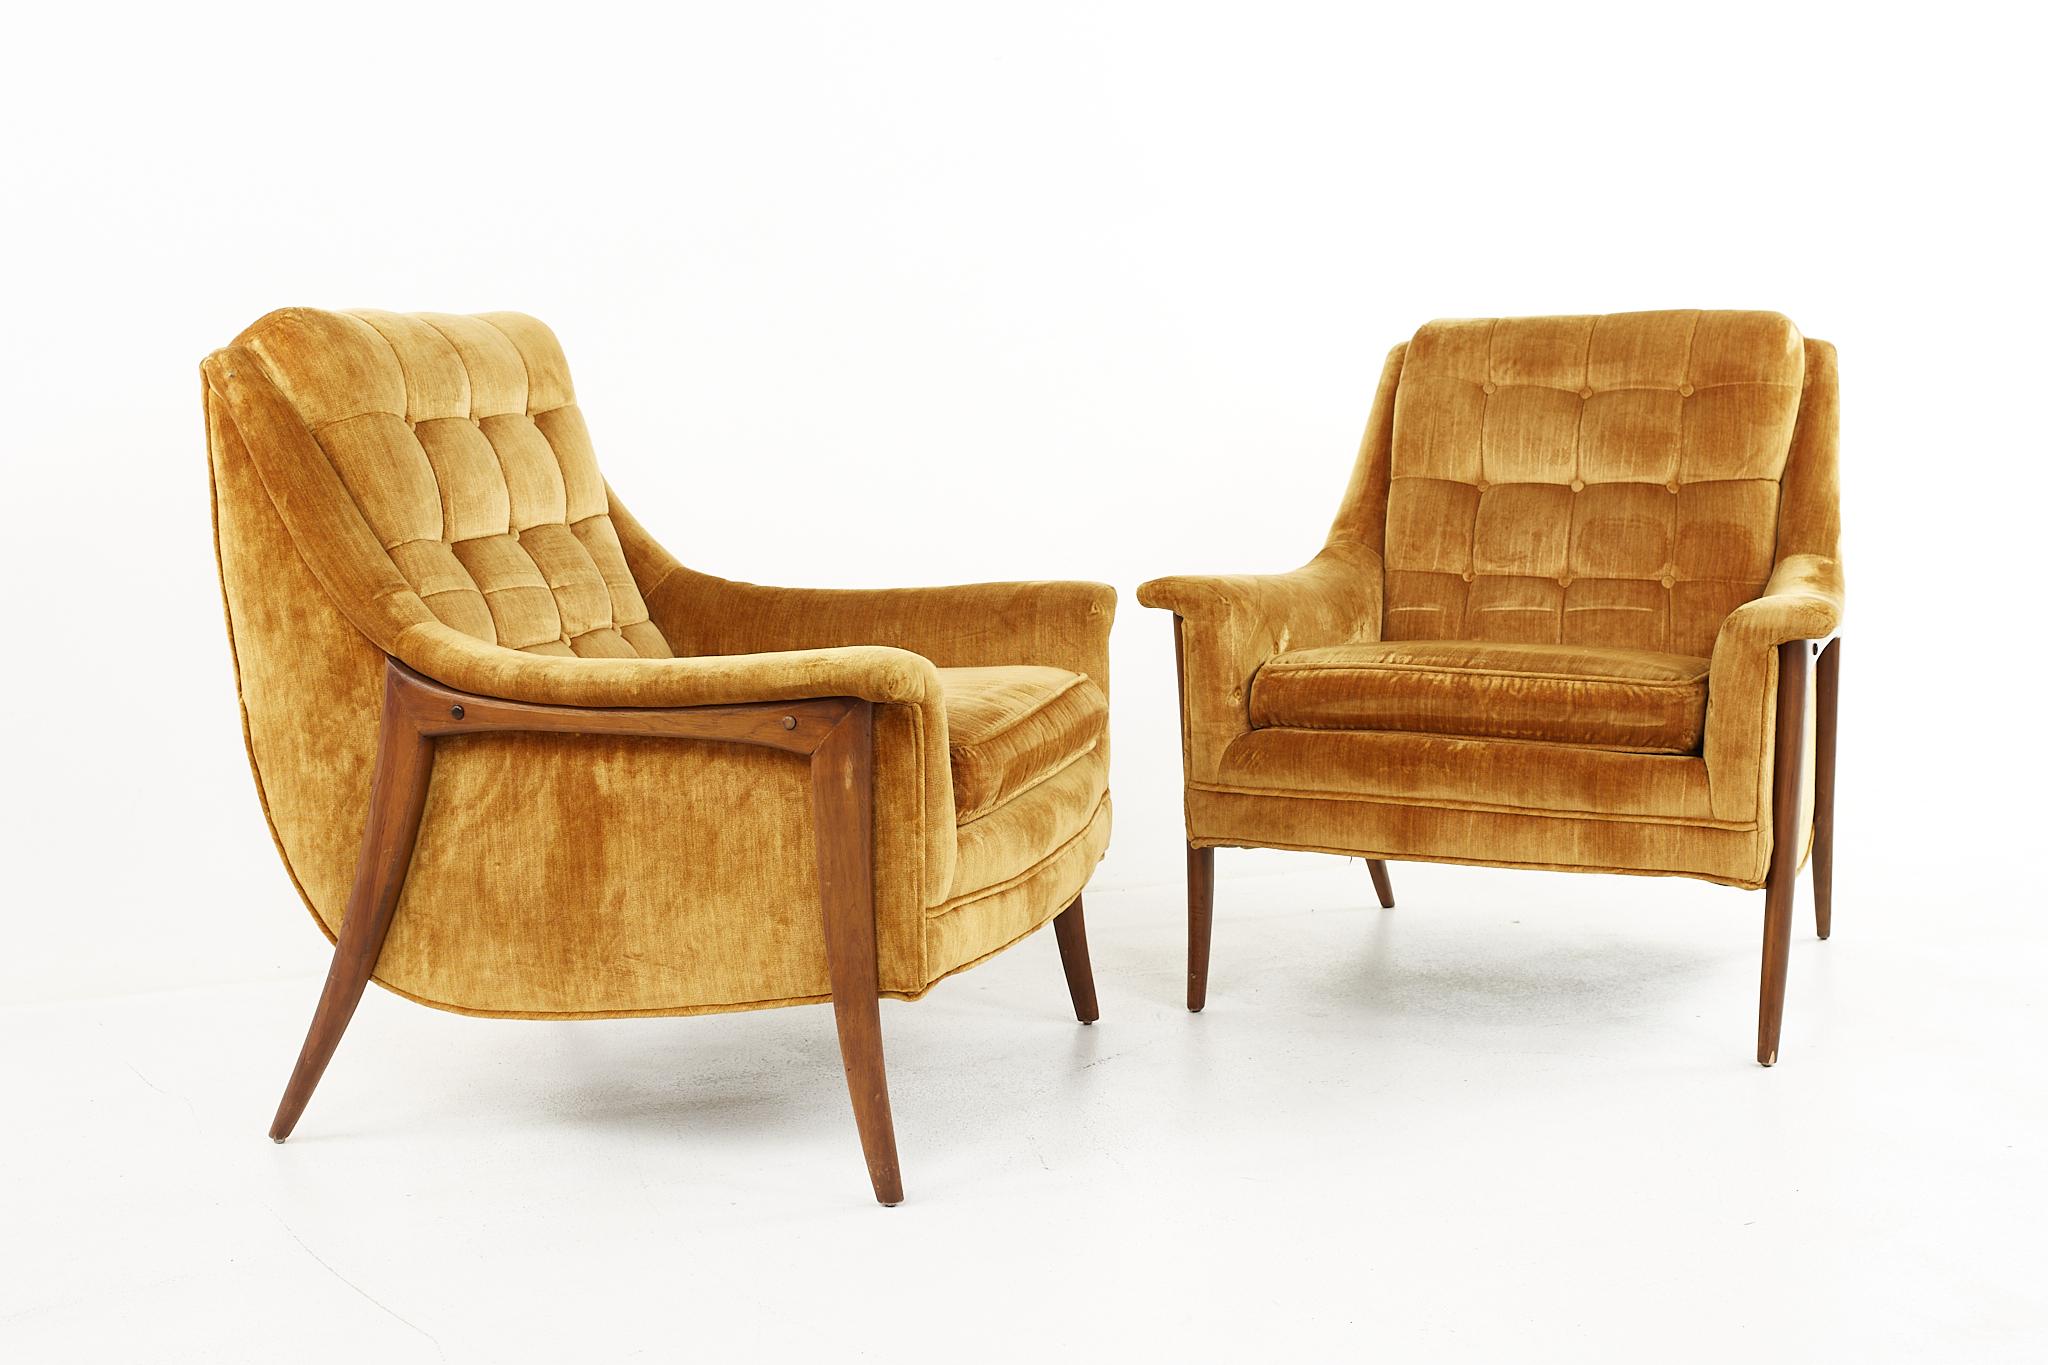 Kroehler avant mid century lounge chairs - a pair

Each chair measures: 32 wide x 30 deep x 33 inches high

All pieces of furniture can be had in what we call restored vintage condition. That means the piece is restored upon purchase so it’s